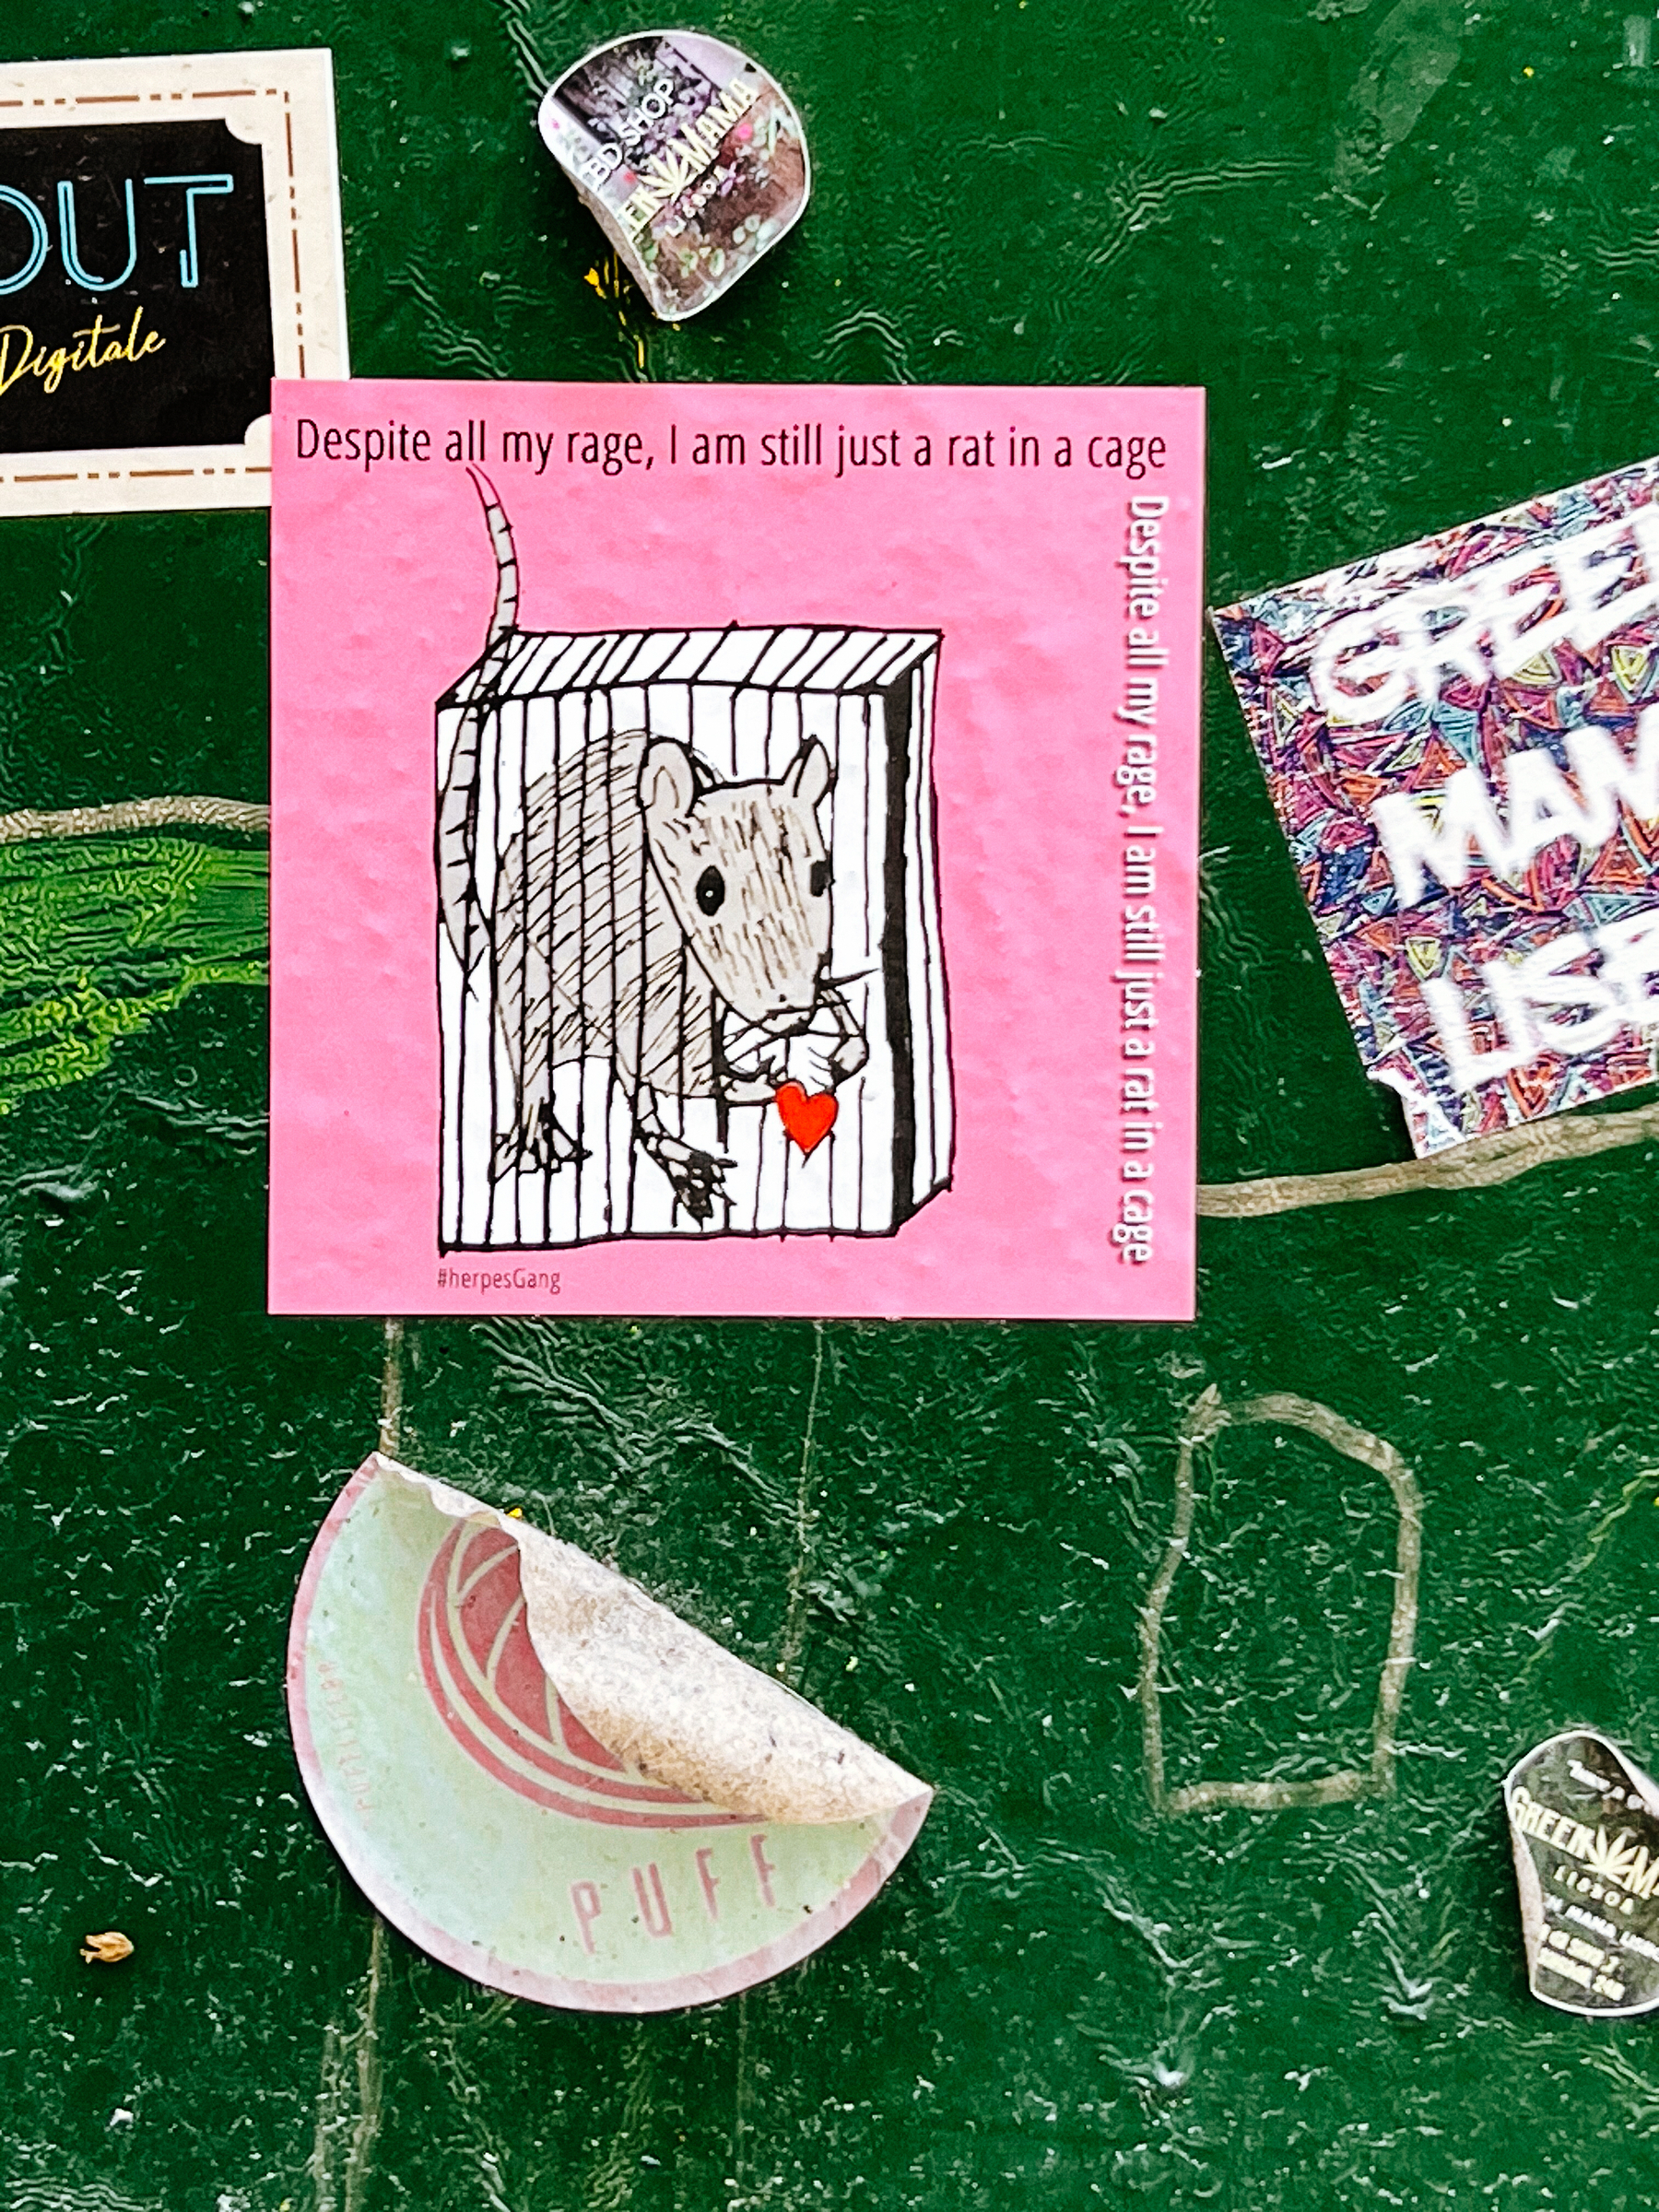 “Despite all my rage, I am still just a rat in a cage”. And a rat in a cage, holding a heart. Sticker. 